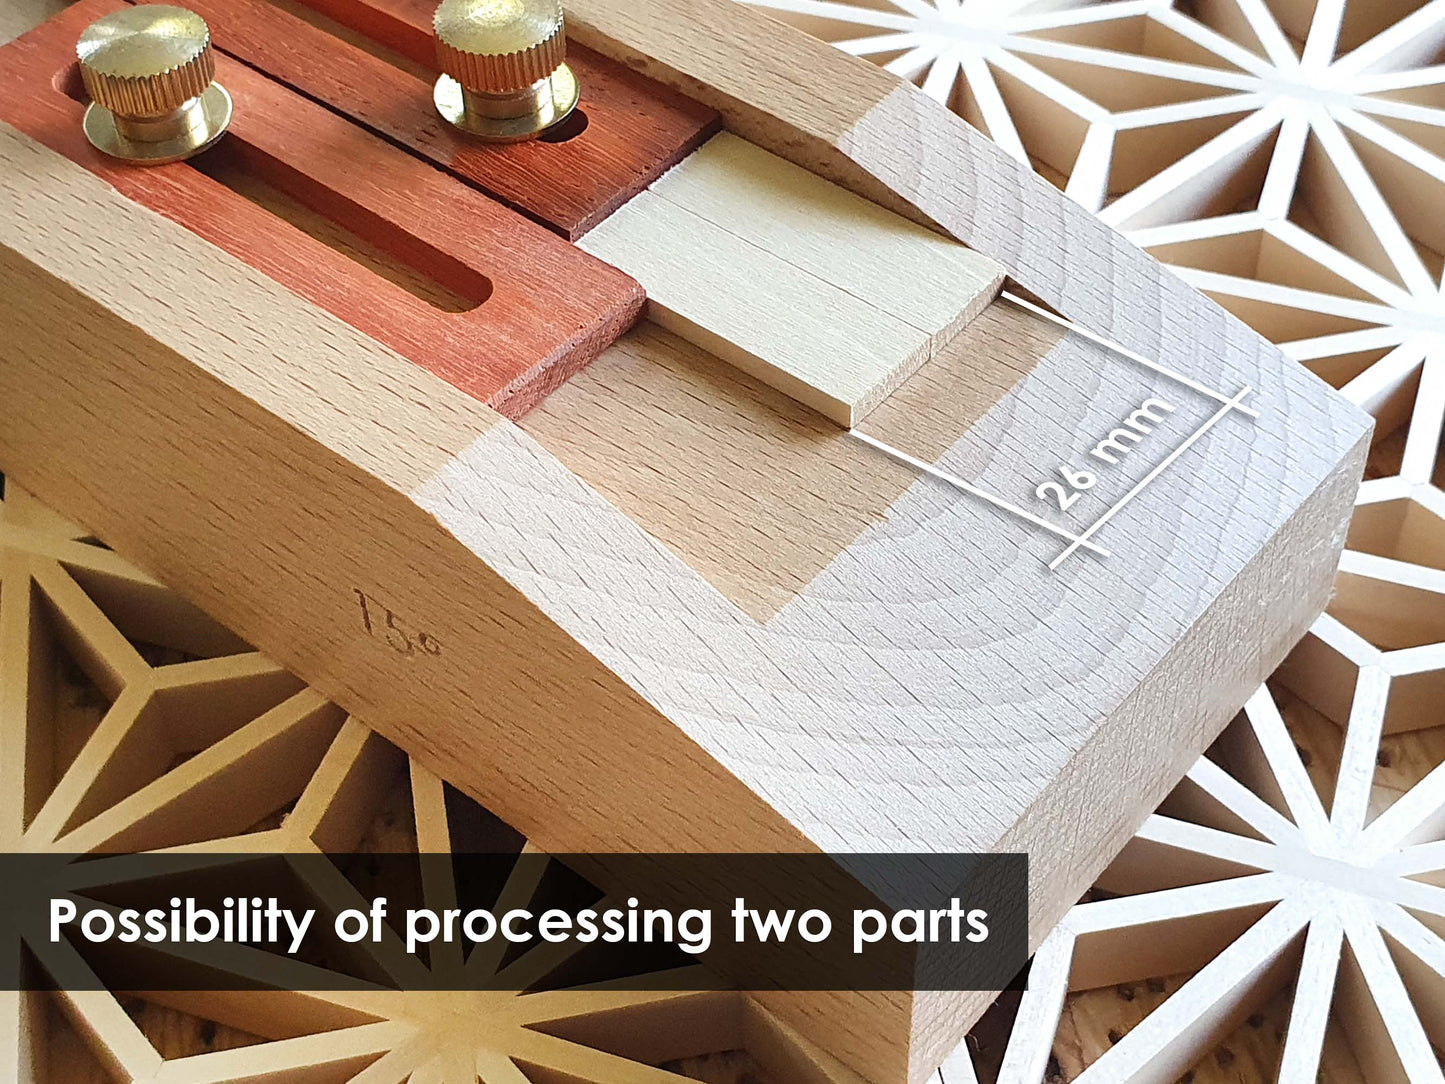 Kumiko jig (guide block) for 15-75 degrees with high precision